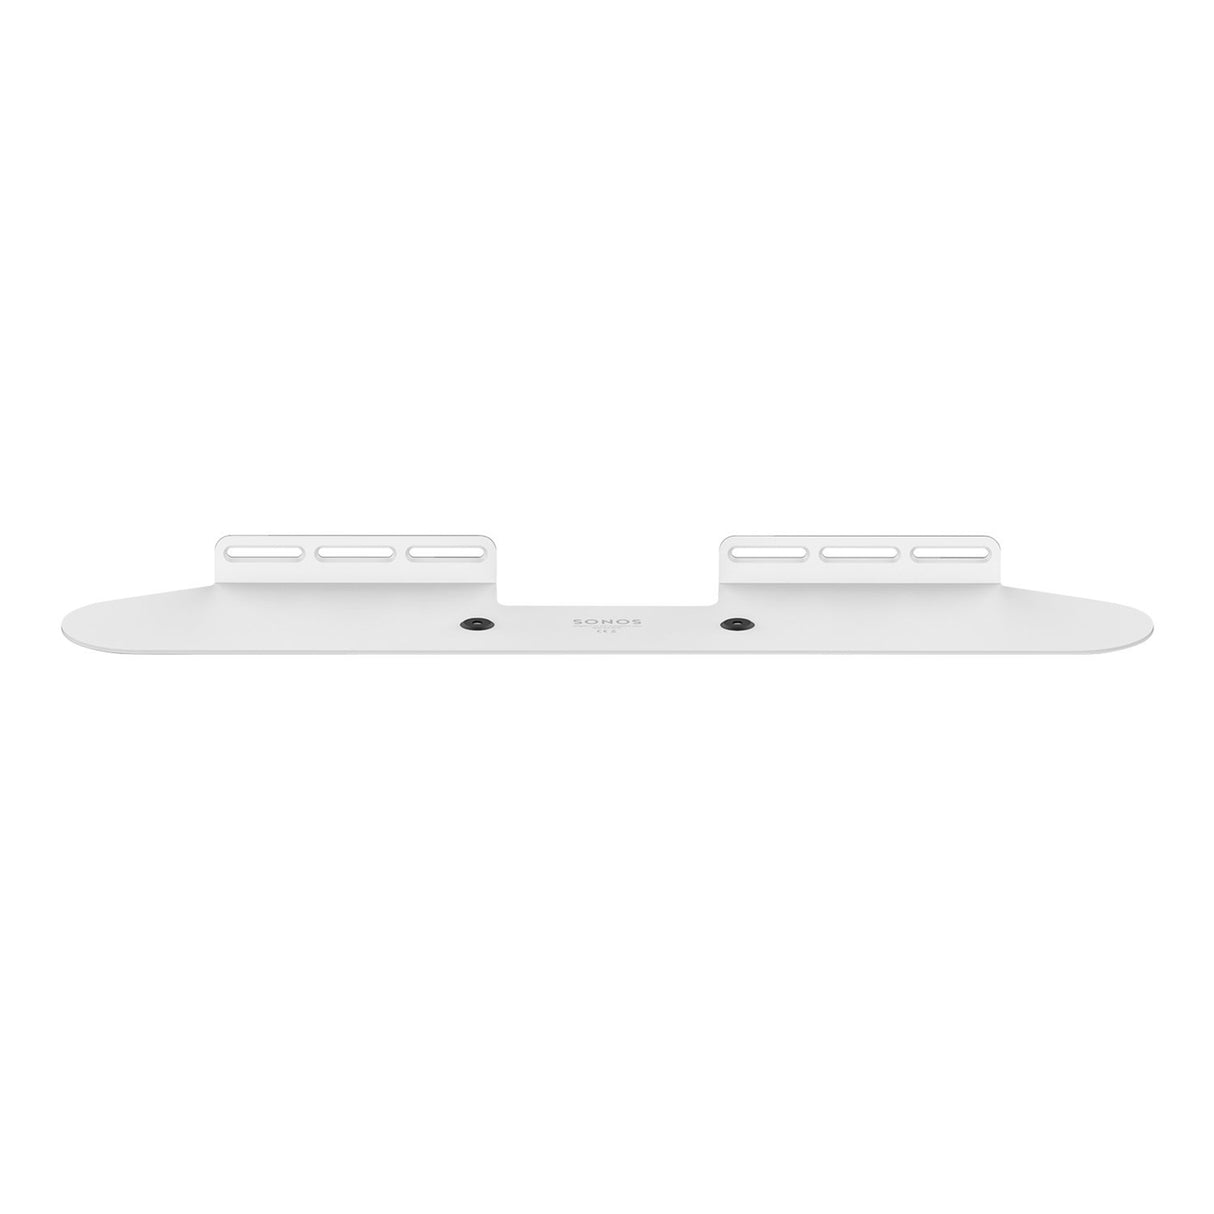 Sonos Flexson Wall Mount for Beam 1 and Beam 2 (White)